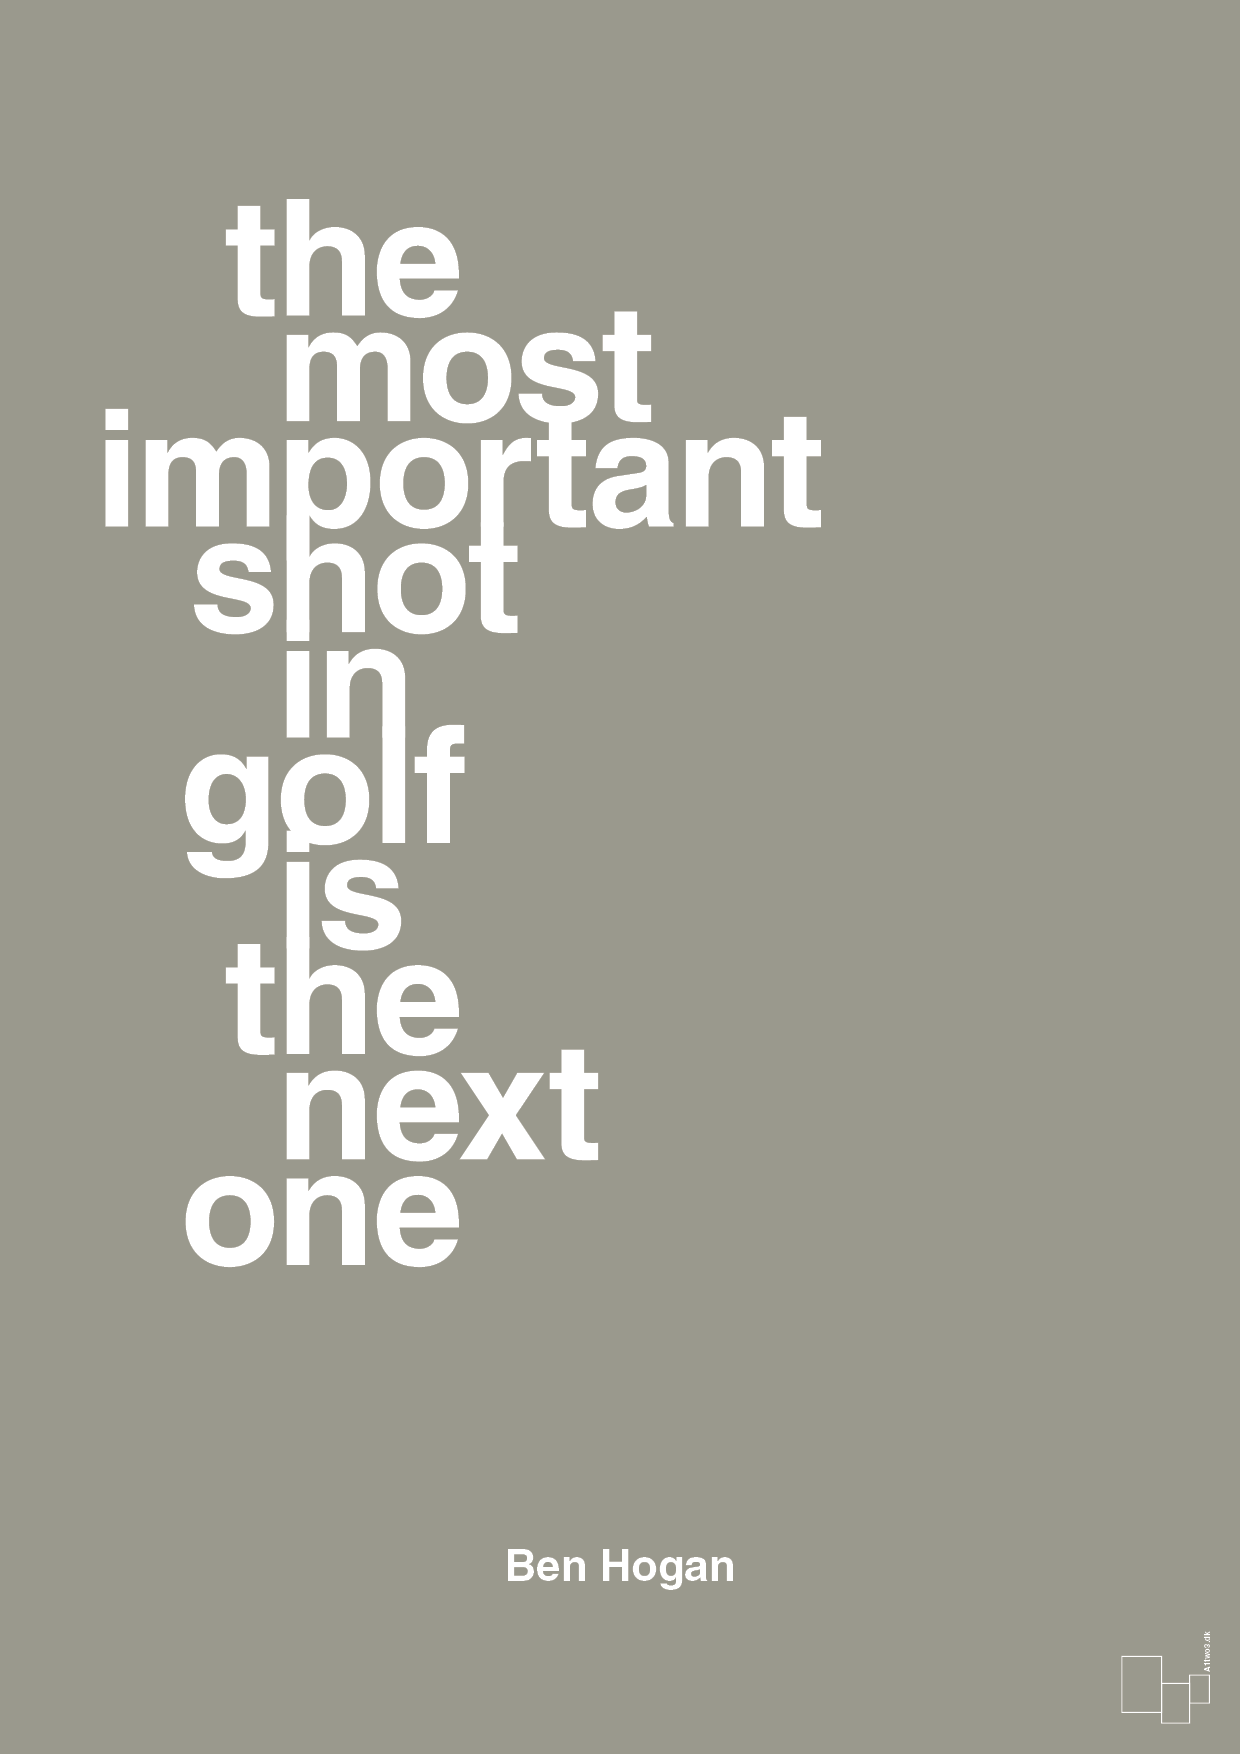 the most important shot in golf is the next one - Plakat med Citater i Battleship Gray